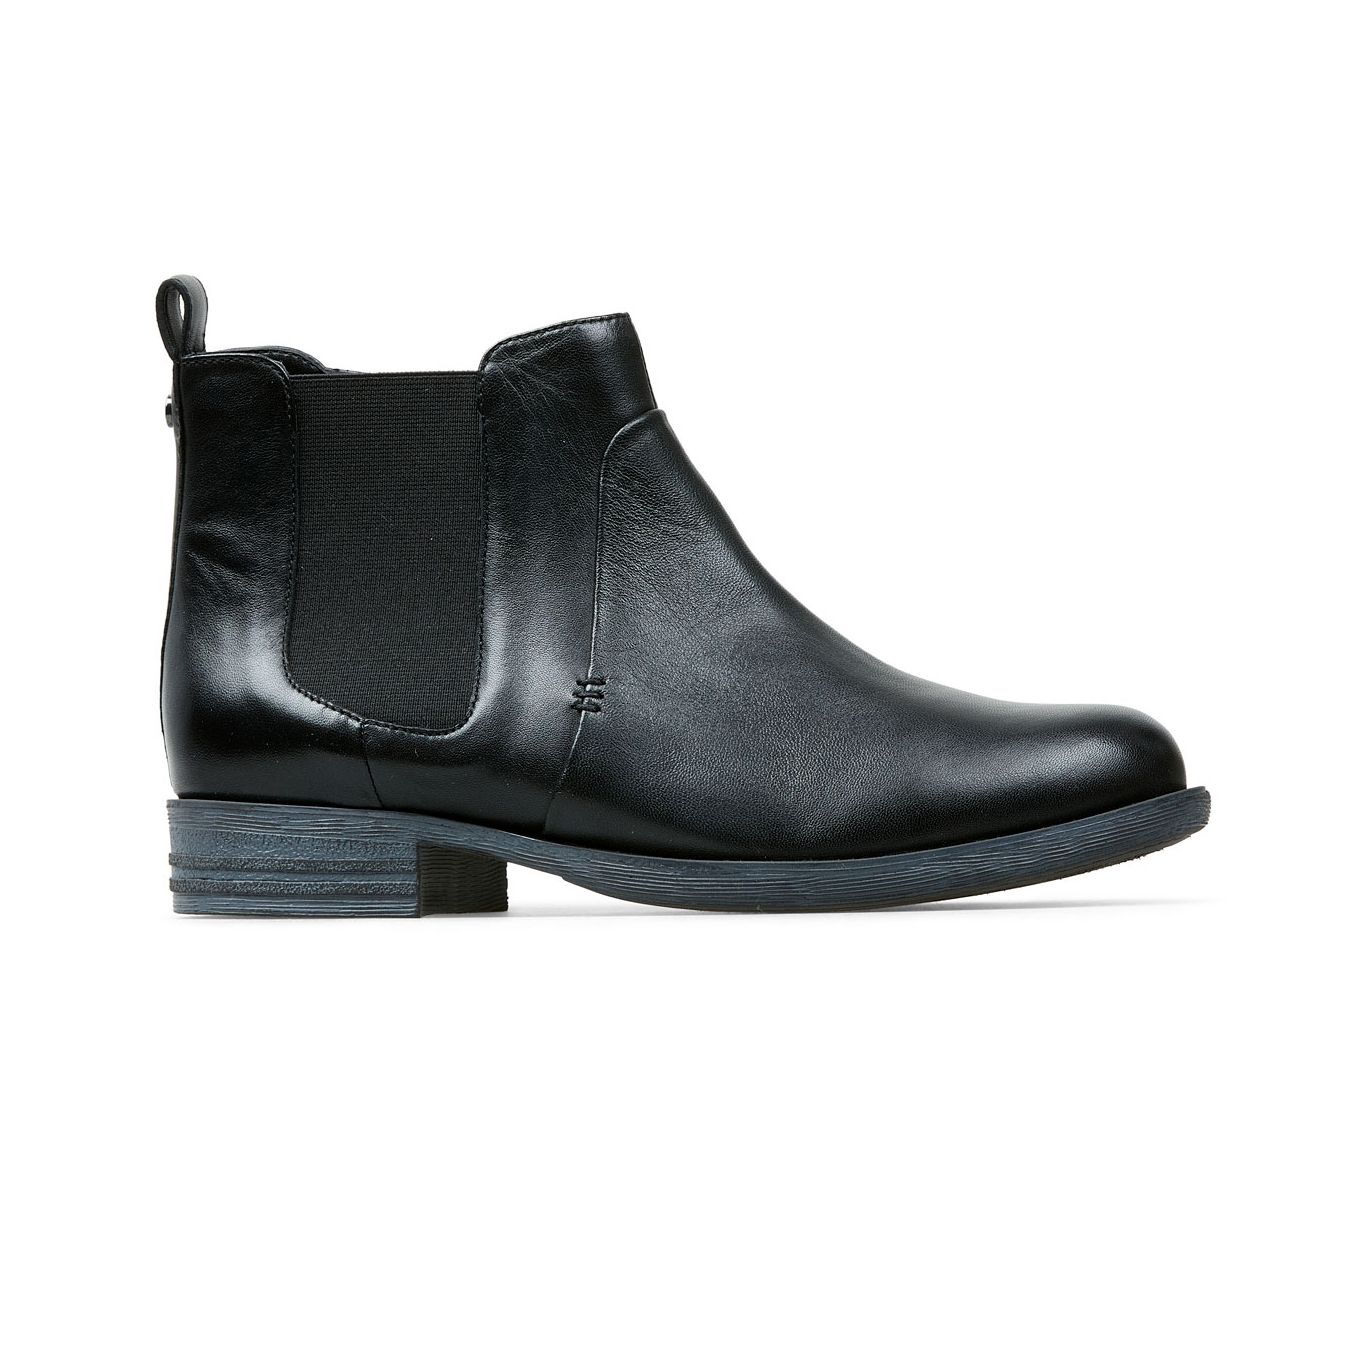 Van-Dal Ford X 3174 Ladies Black Leather Wider Fitting Chelsea Boots